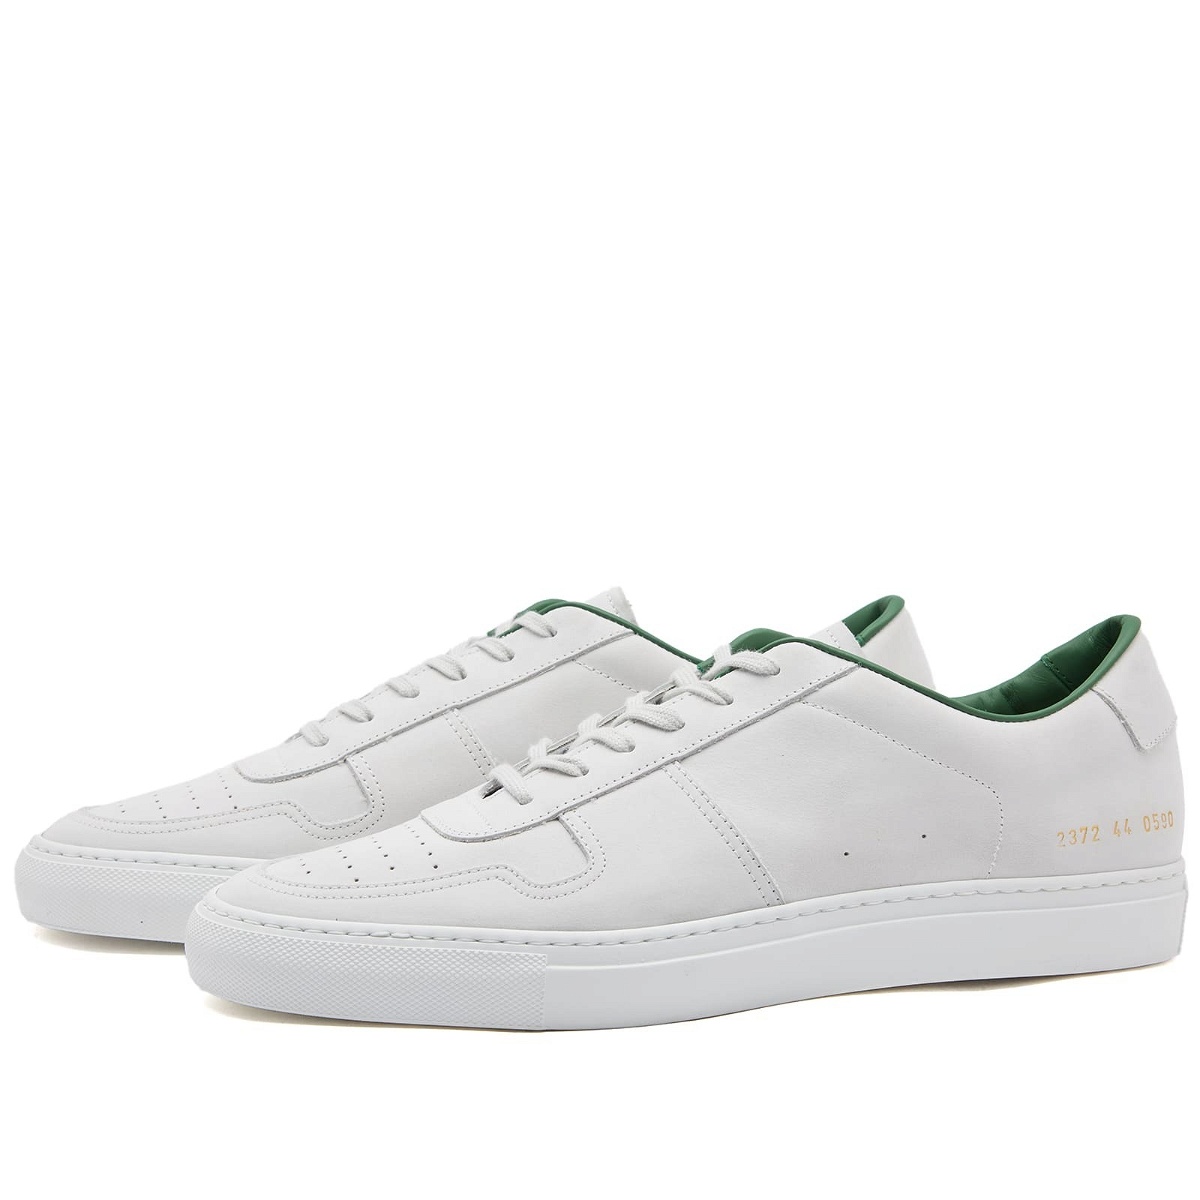 Photo: Common Projects Men's B-Ball Summer Nubuck Sneakers in White/Green